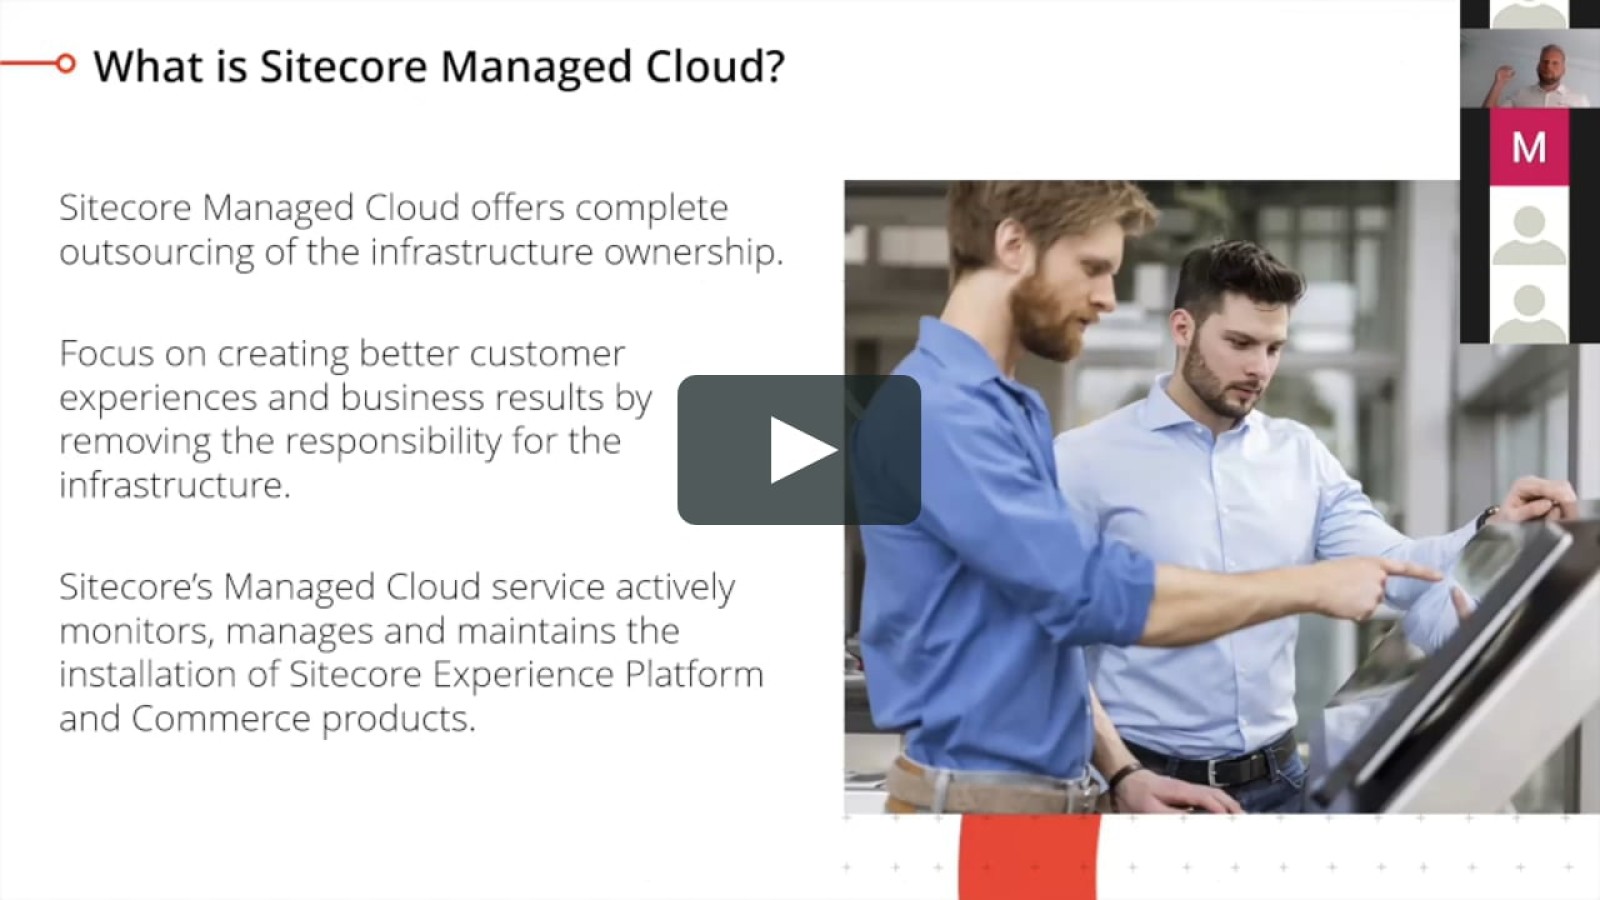 Introduction to Sitecore Managed Cloud